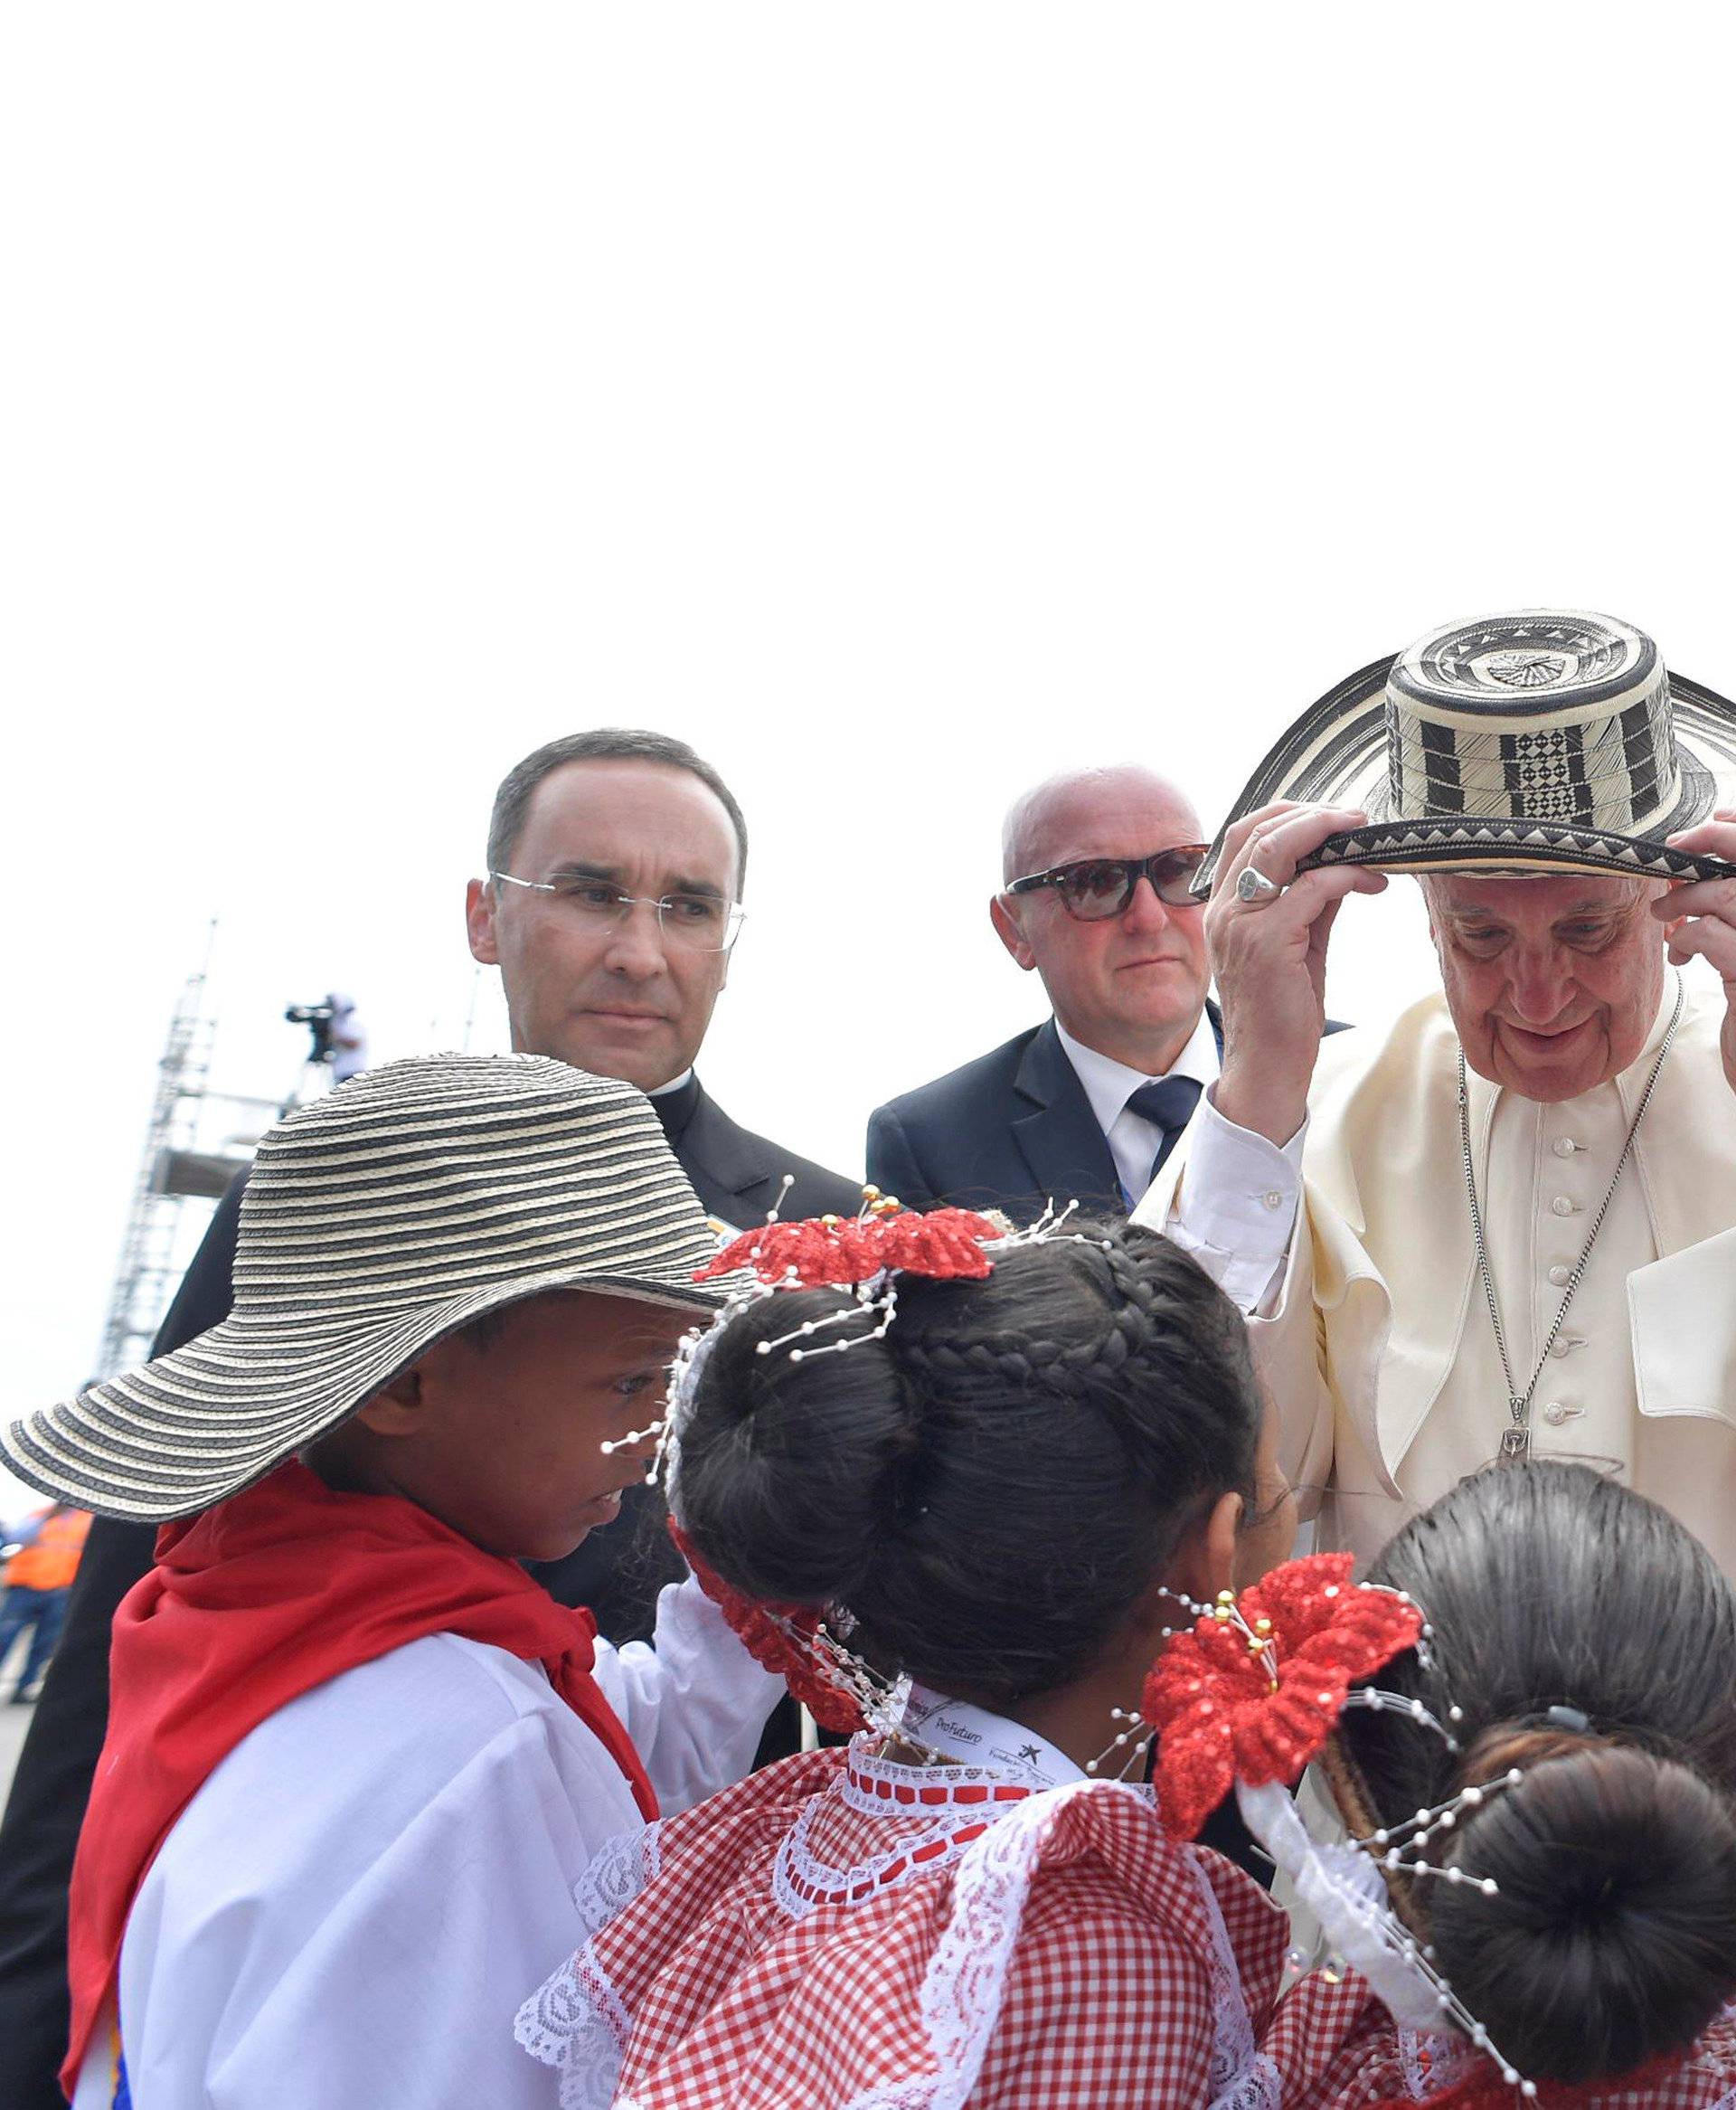 Pope Francis is presented with a hat as he arrives at the Cartagena airport